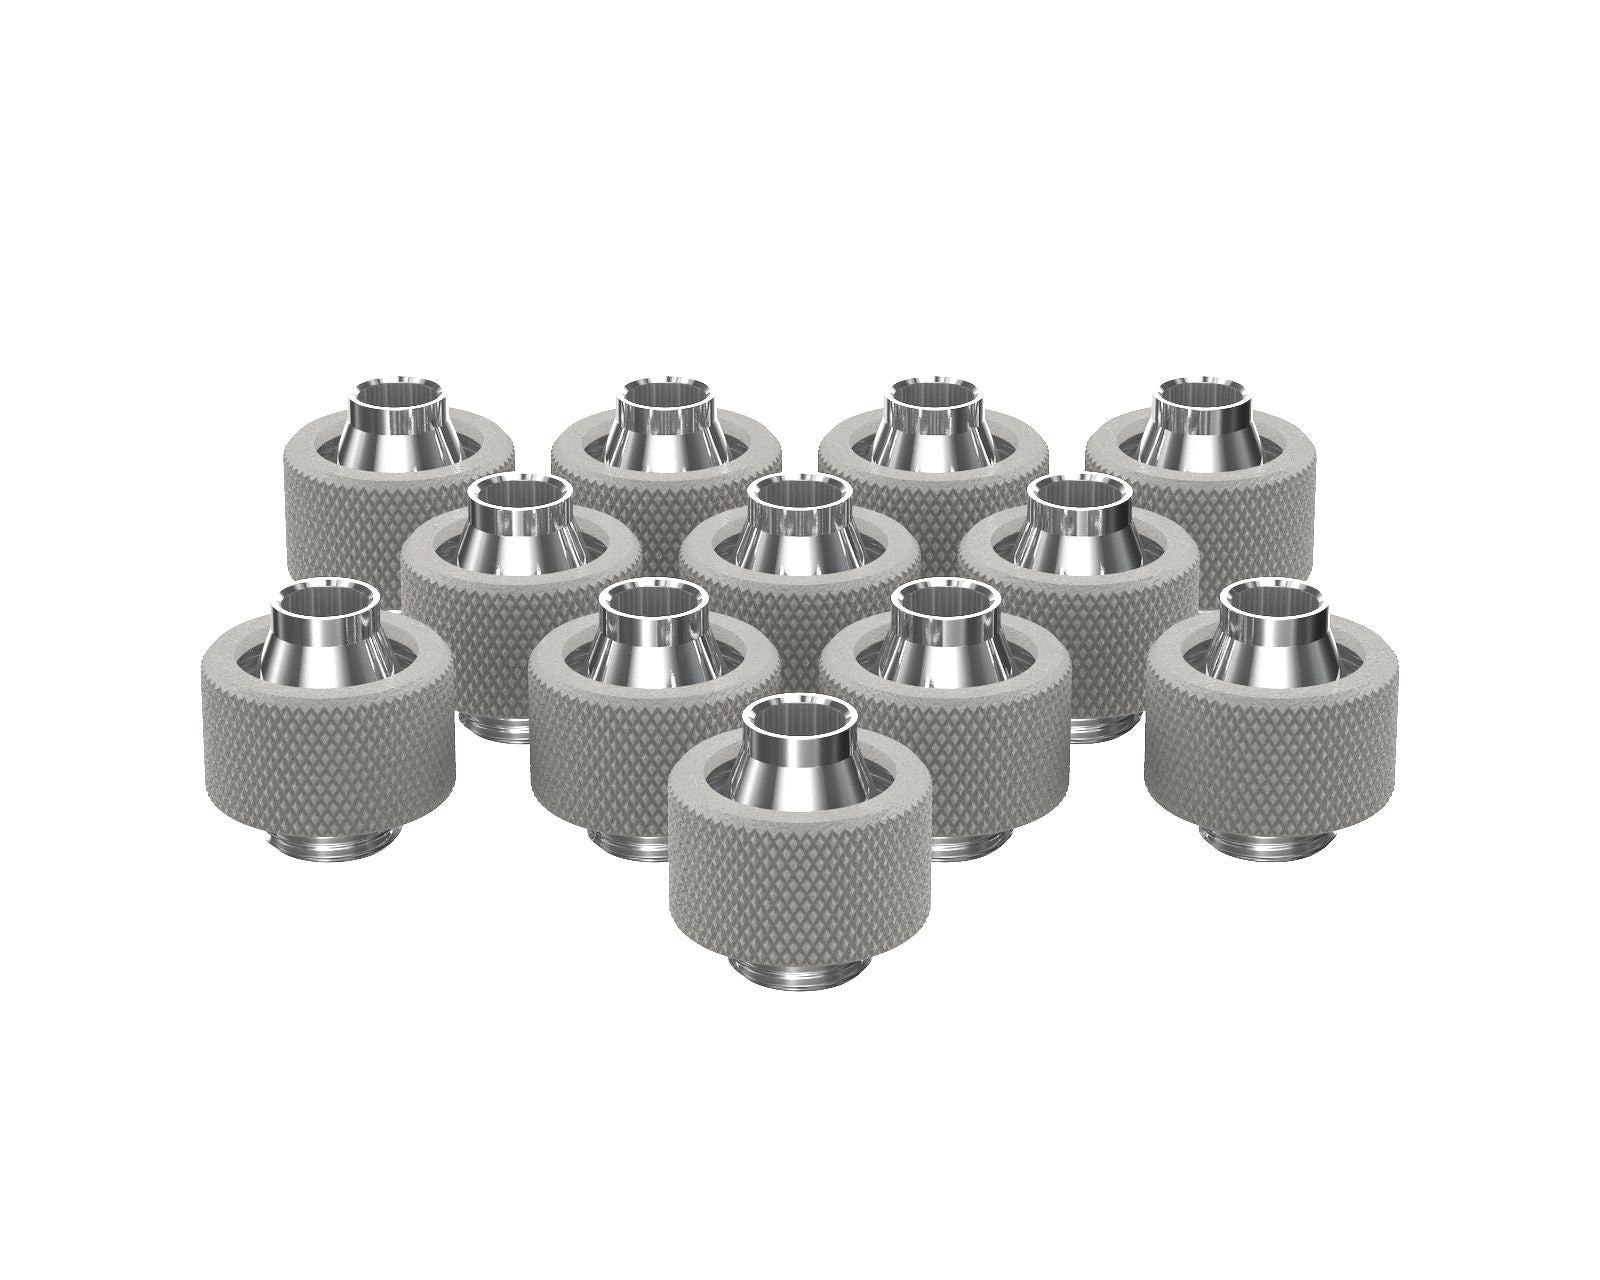 PrimoChill SecureFit SX - Premium Compression Fitting For 7/16in ID x 5/8in OD Flexible Tubing 12 Pack (F-SFSX758-12) - Available in 20+ Colors, Custom Watercooling Loop Ready - TX Matte Silver